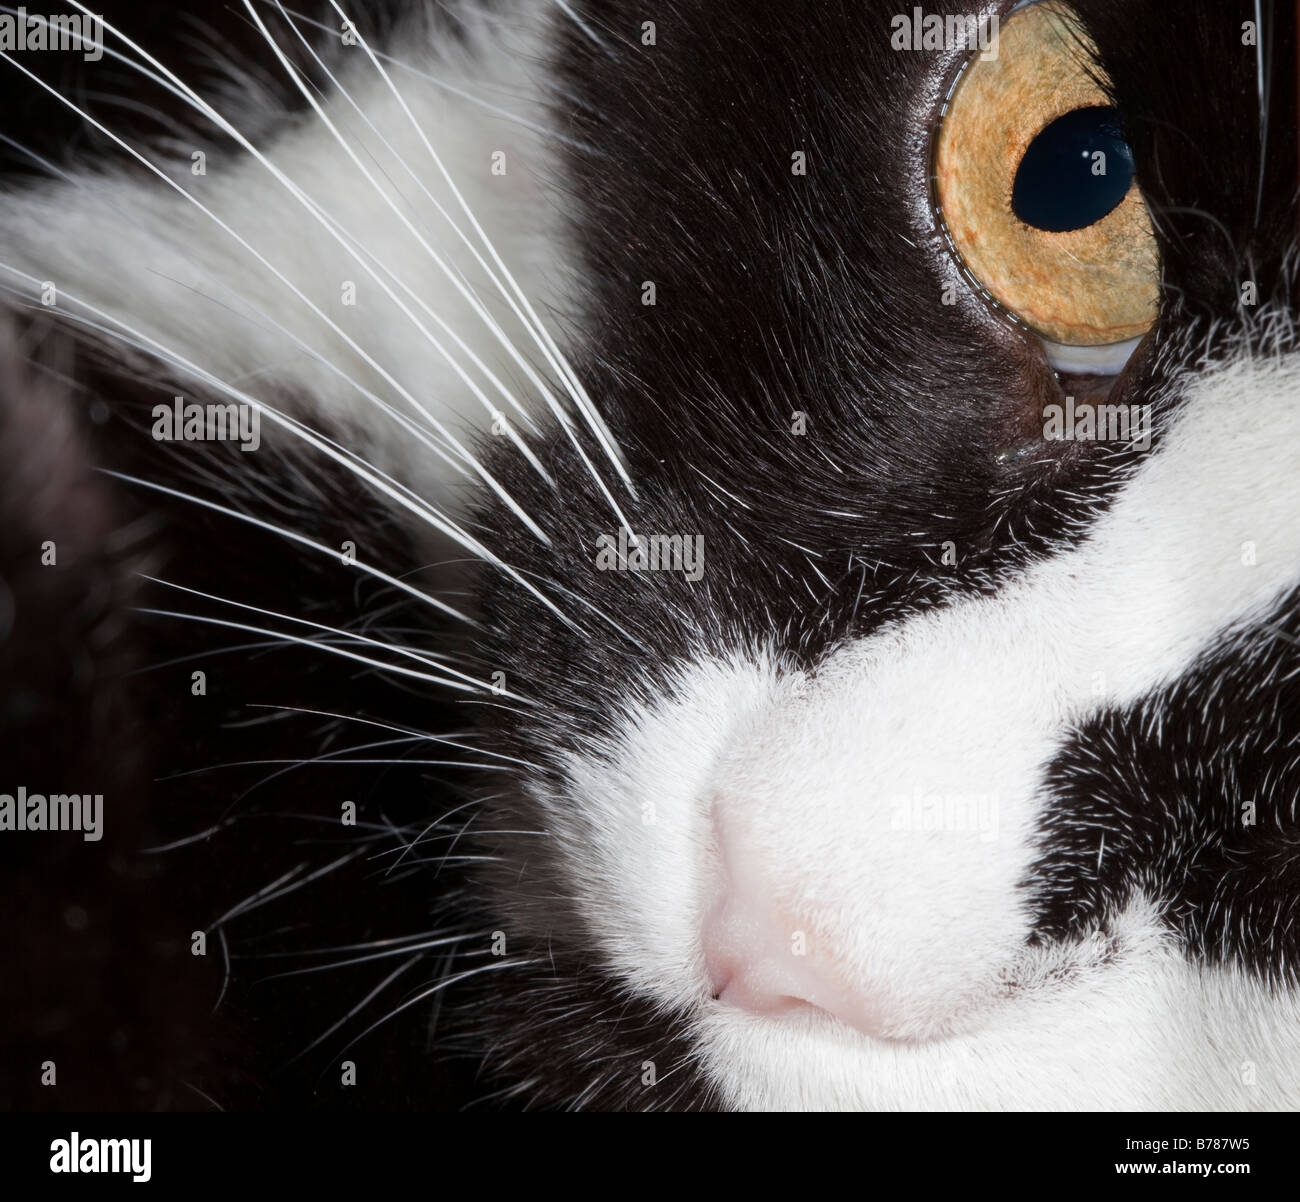 Close up of black and white cat face with whiskers nose and eye Stock Photo